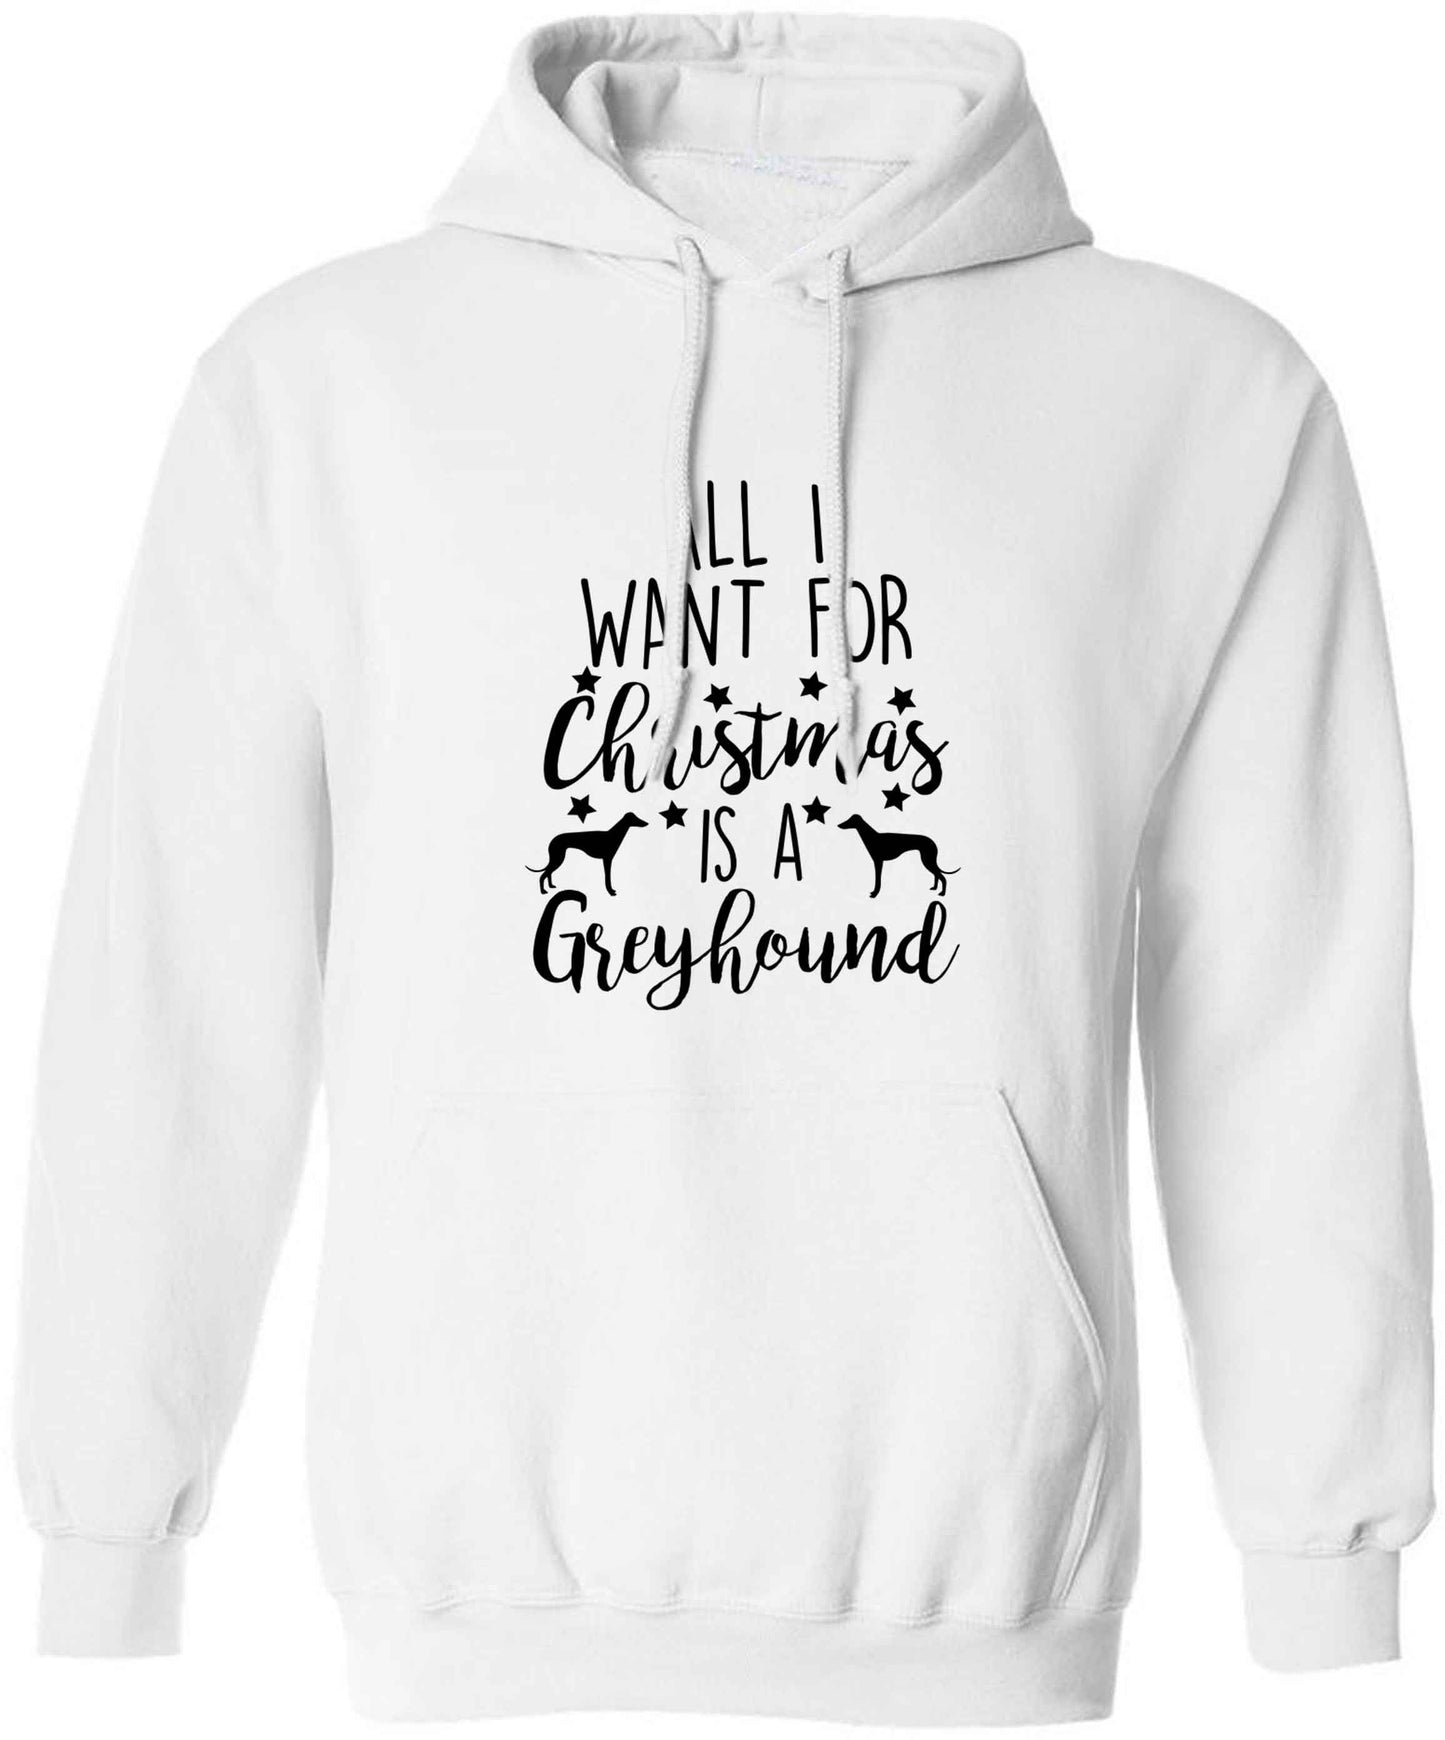 All I want for Christmas is a greyhound adults unisex white hoodie 2XL